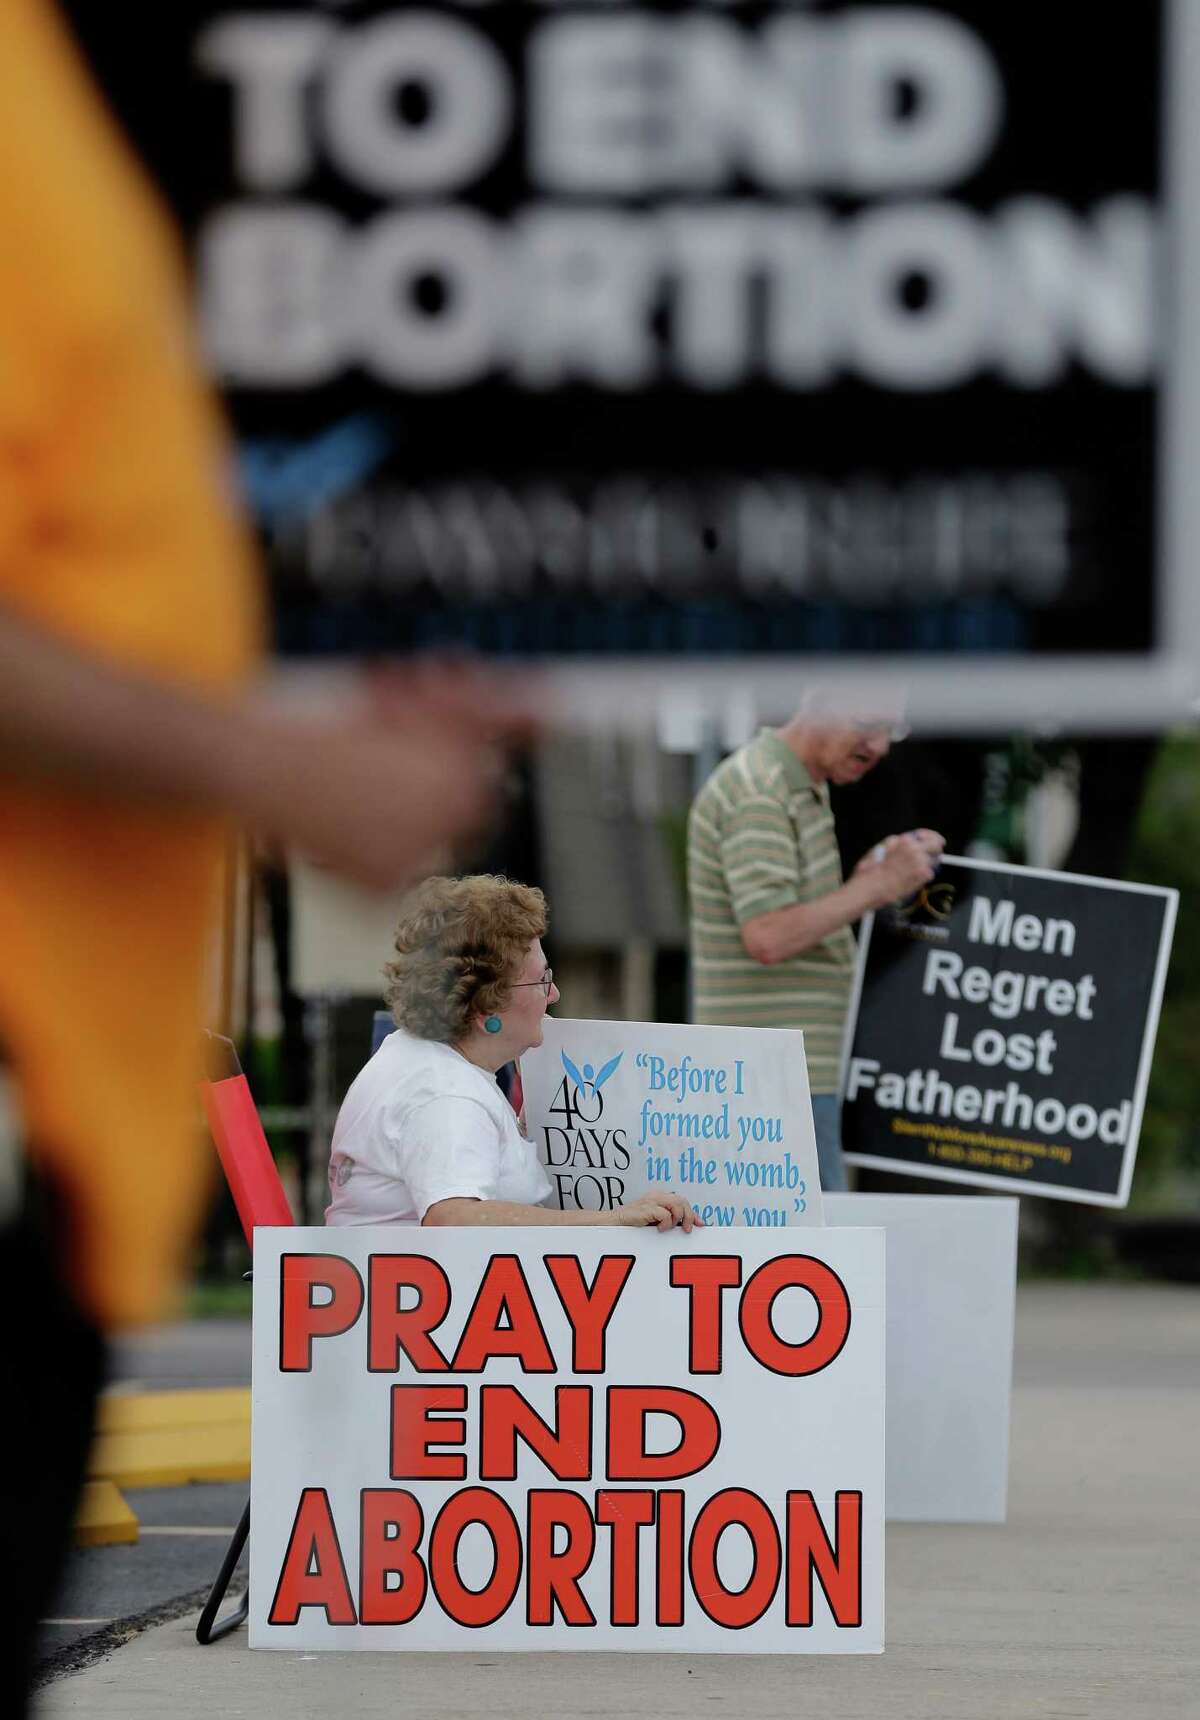 Dottie and Tom Knodell hold signs outside a Planned Parenthood Clinic in San Antonio on Tuesday. A federal judge is considering whether to grant an appeal letting Texas enforce a law that could shut down a dozen Texas abortion clinics.